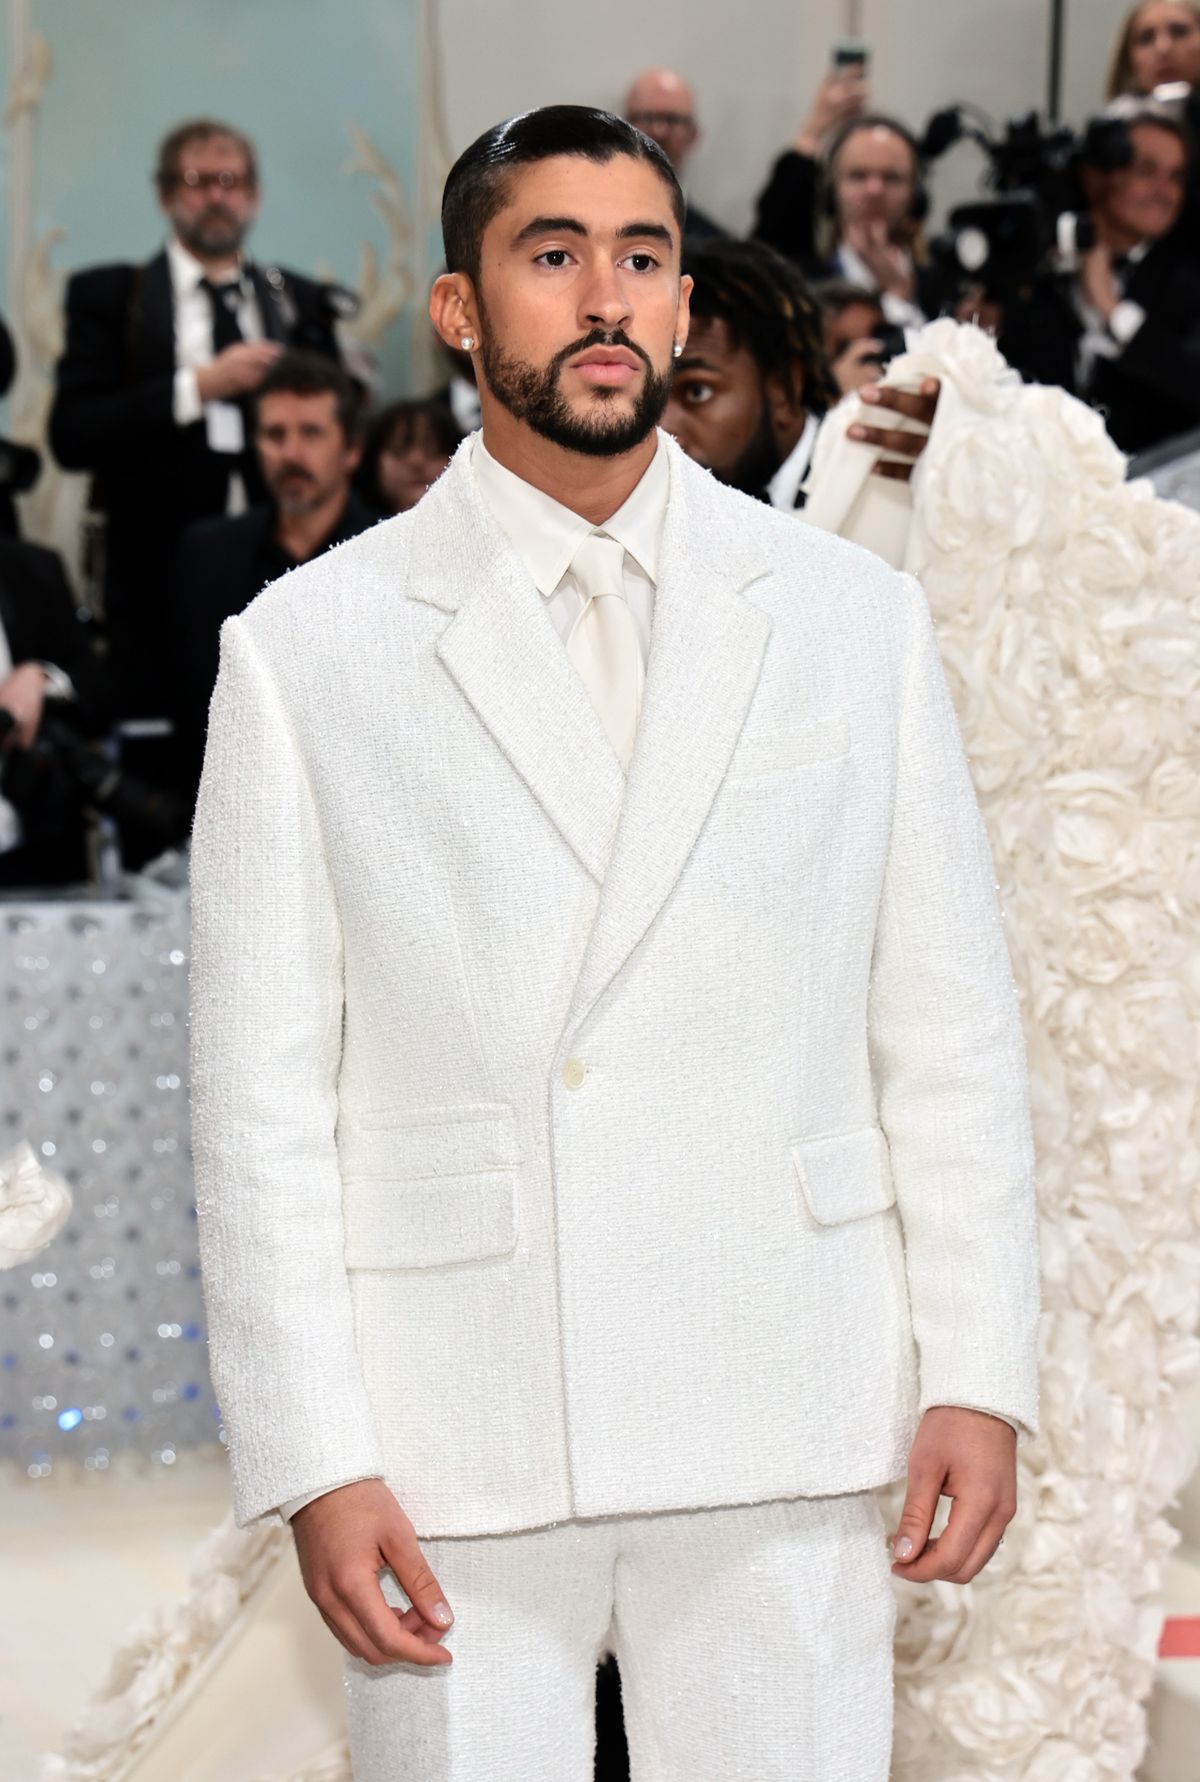 Bad Bunny Wears a Suave White Suit and Flowing Cape to Met Gala 2023